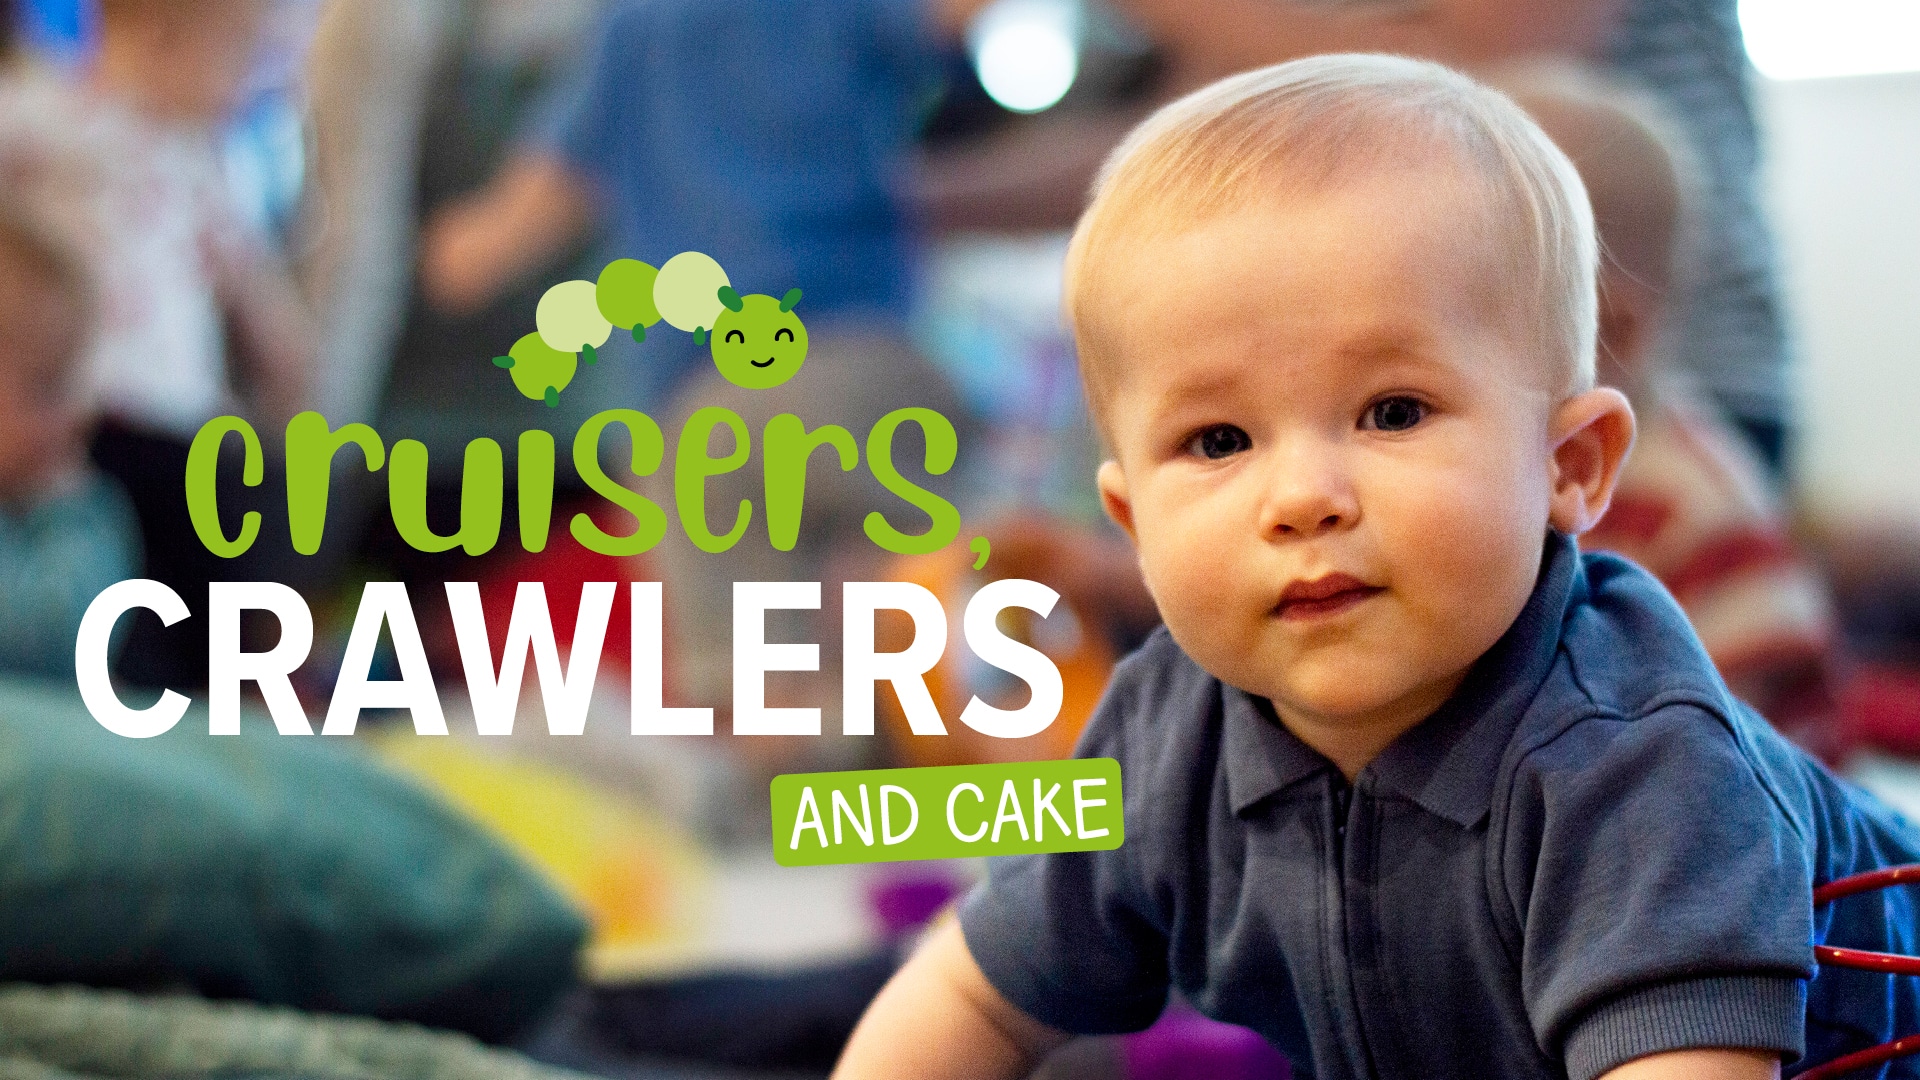 A baby in a crawling position looking at the camera with text "cruisers, crawlers and cake"